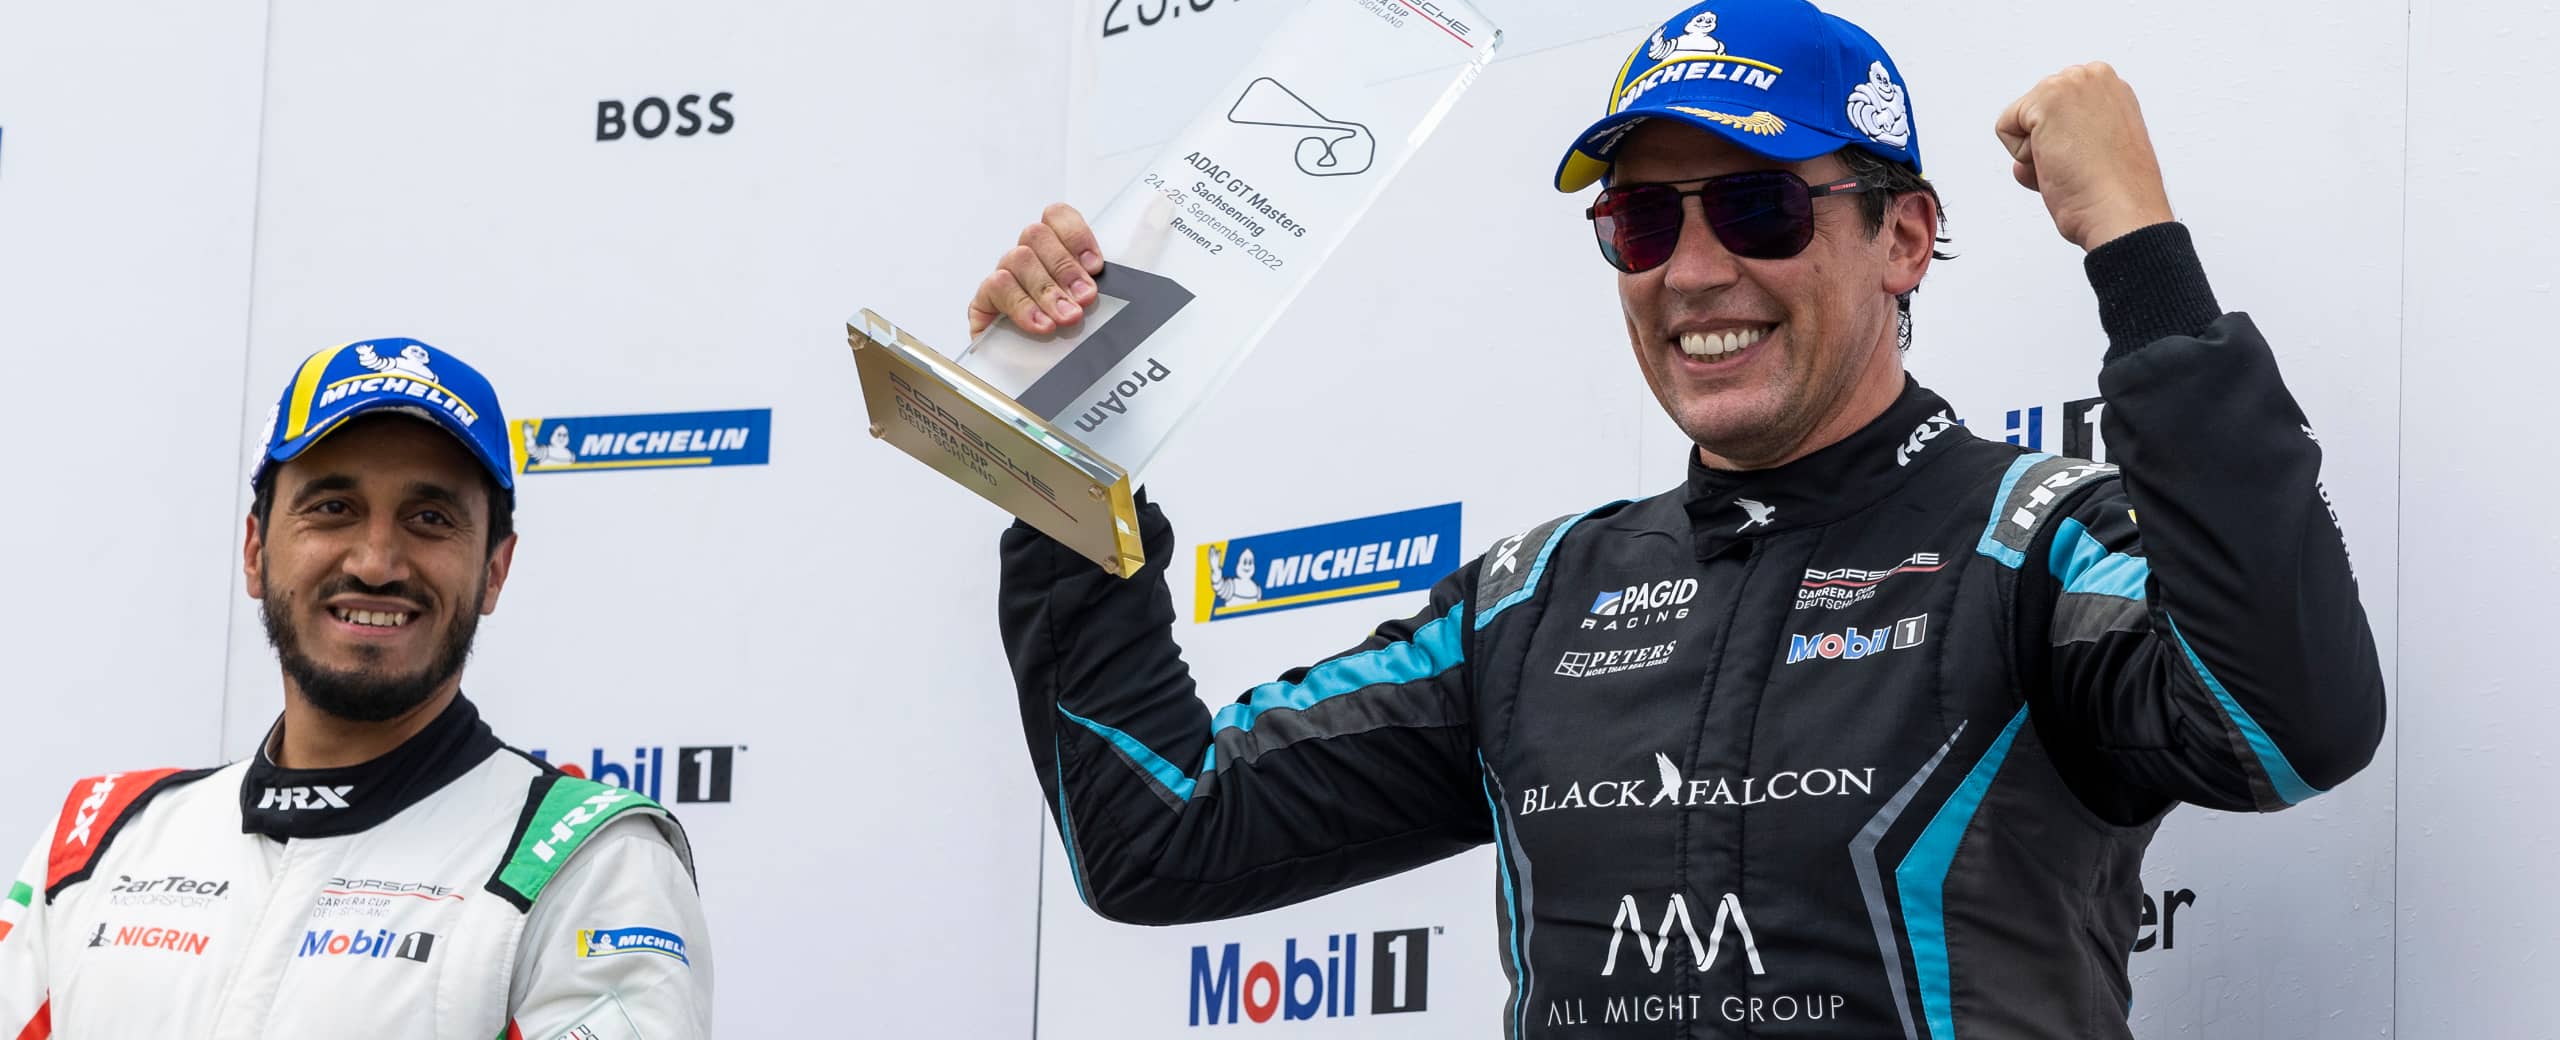 Carlos Rivas on the Podium at Sachsenring after winning the Porsche Carrera Cup Deutschland PRO-AM Race with his Porsche 992 GT3 Cup  BLACK FALCON